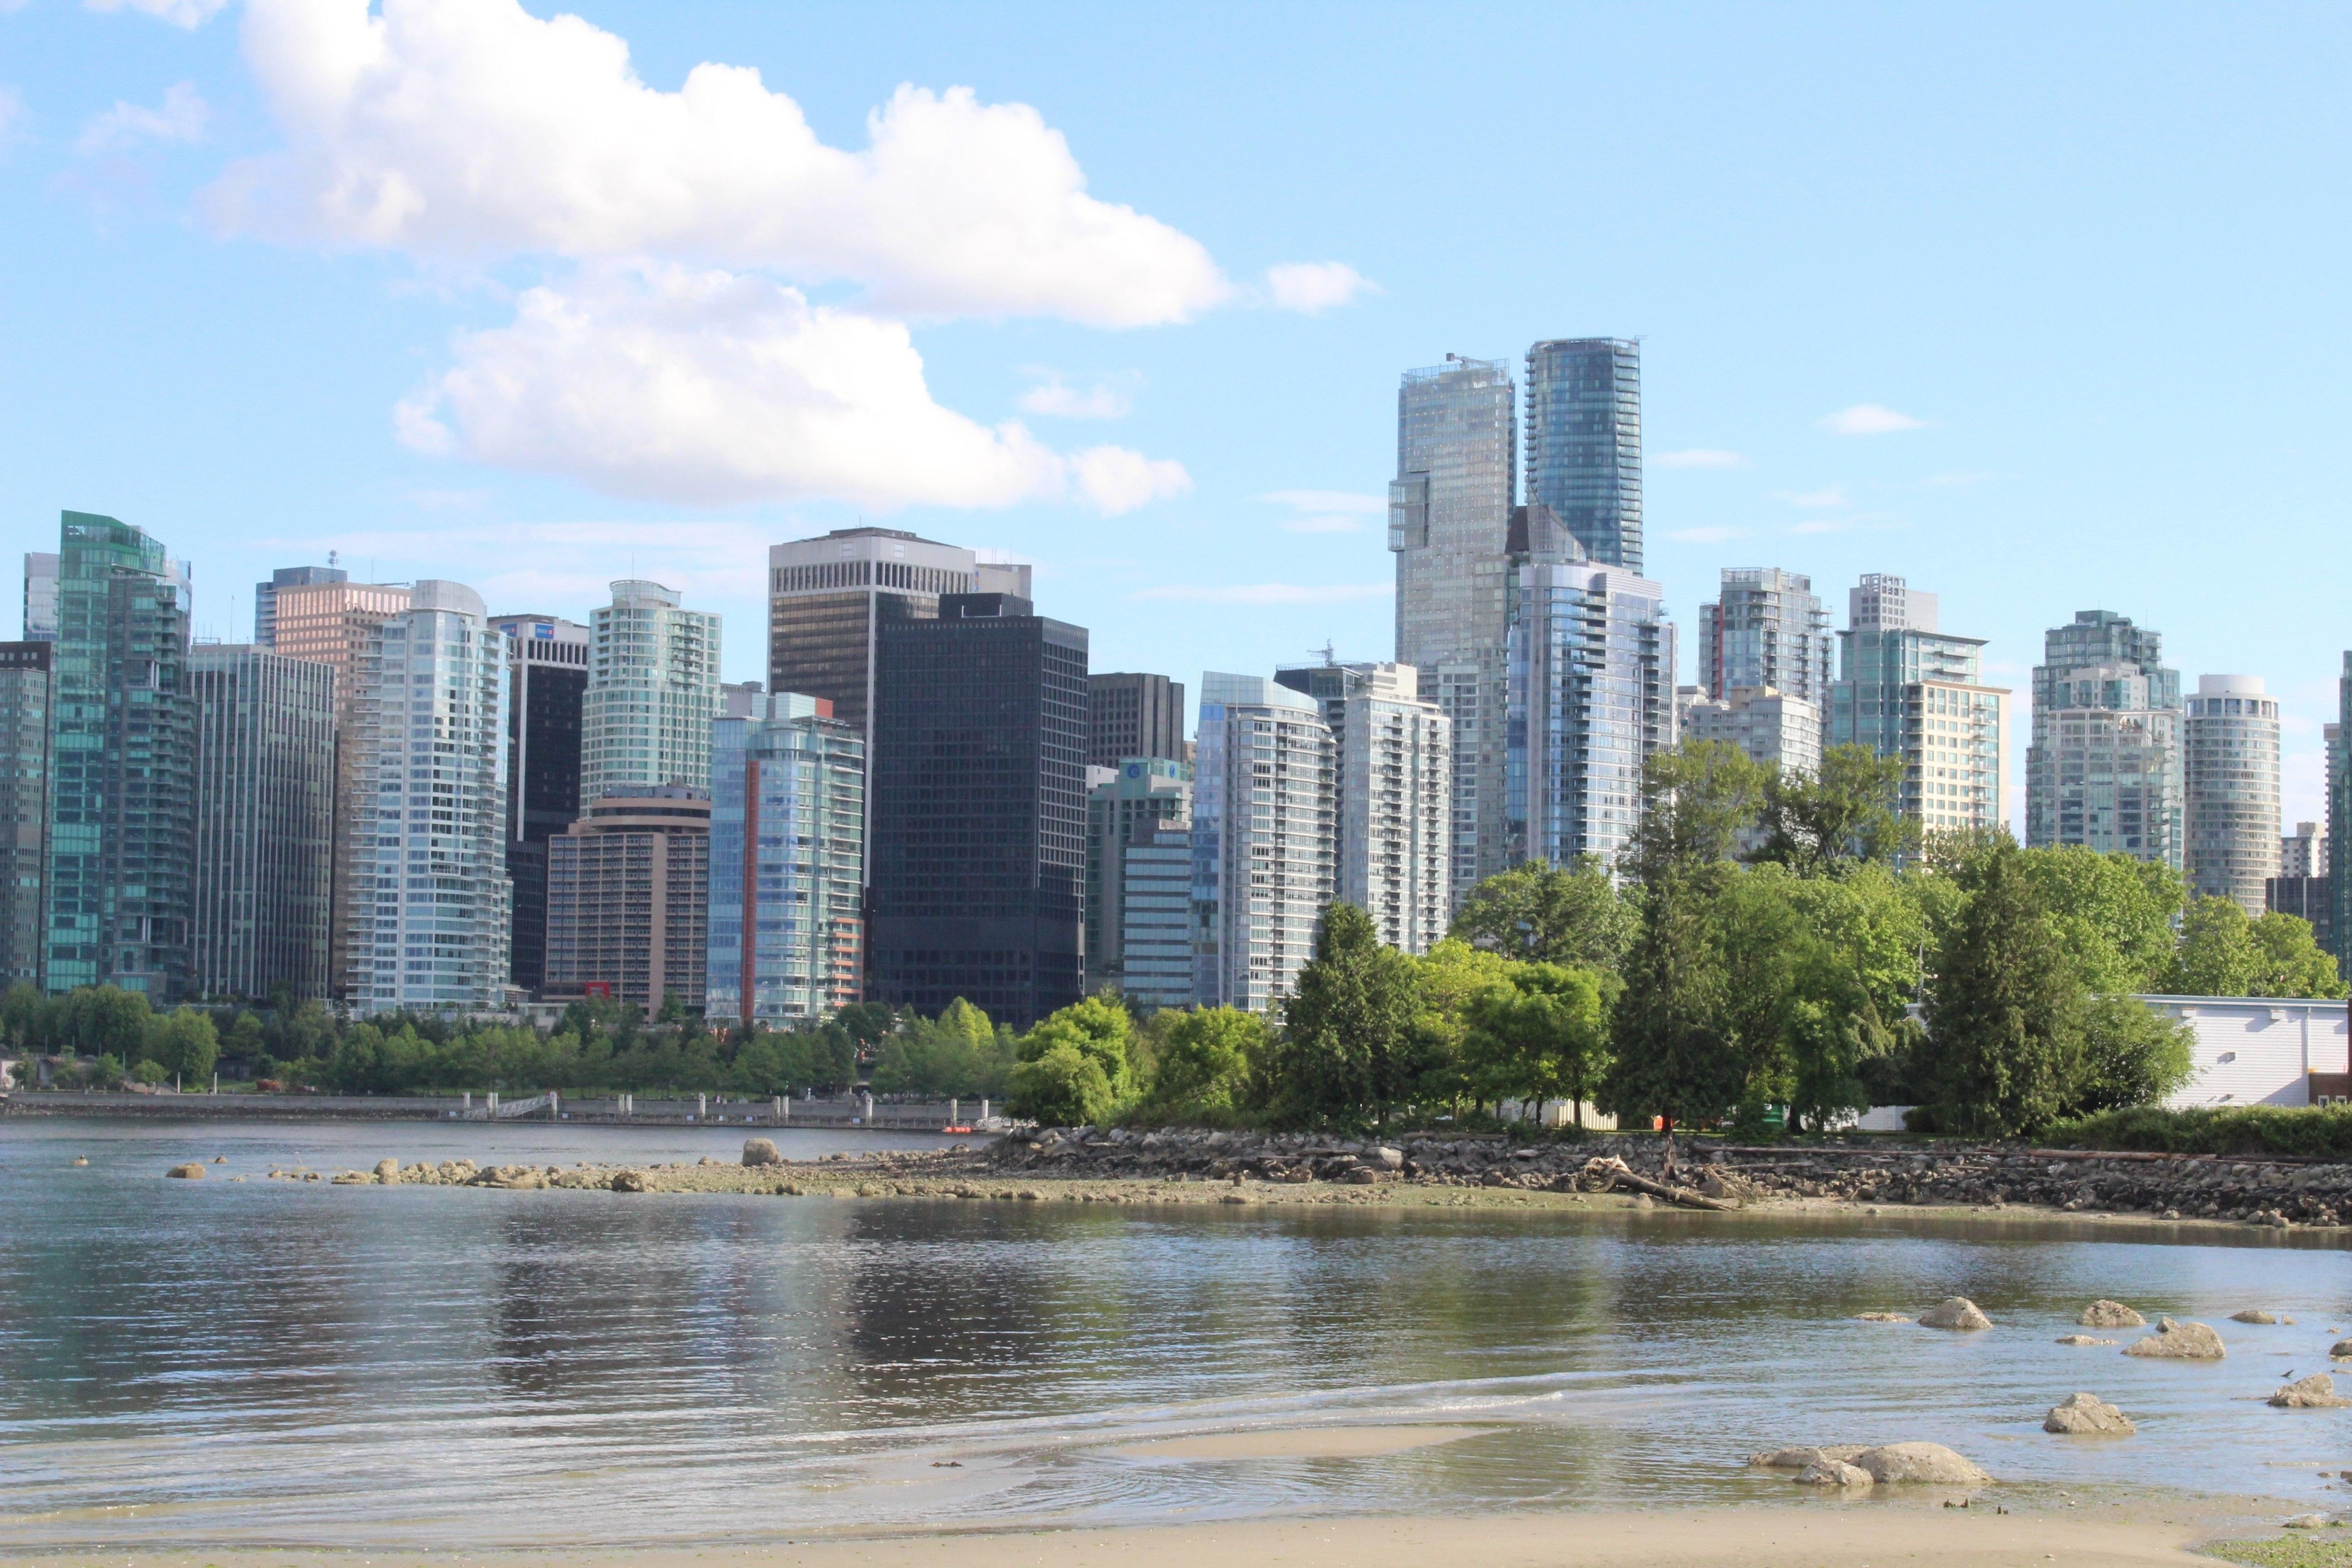 Vancouver is half the size physically of Salt Lake City, but it has three times the population of Salt Lake. However, Vancouver is not a dirty, bustling metropolis. It's actually rather beautiful.